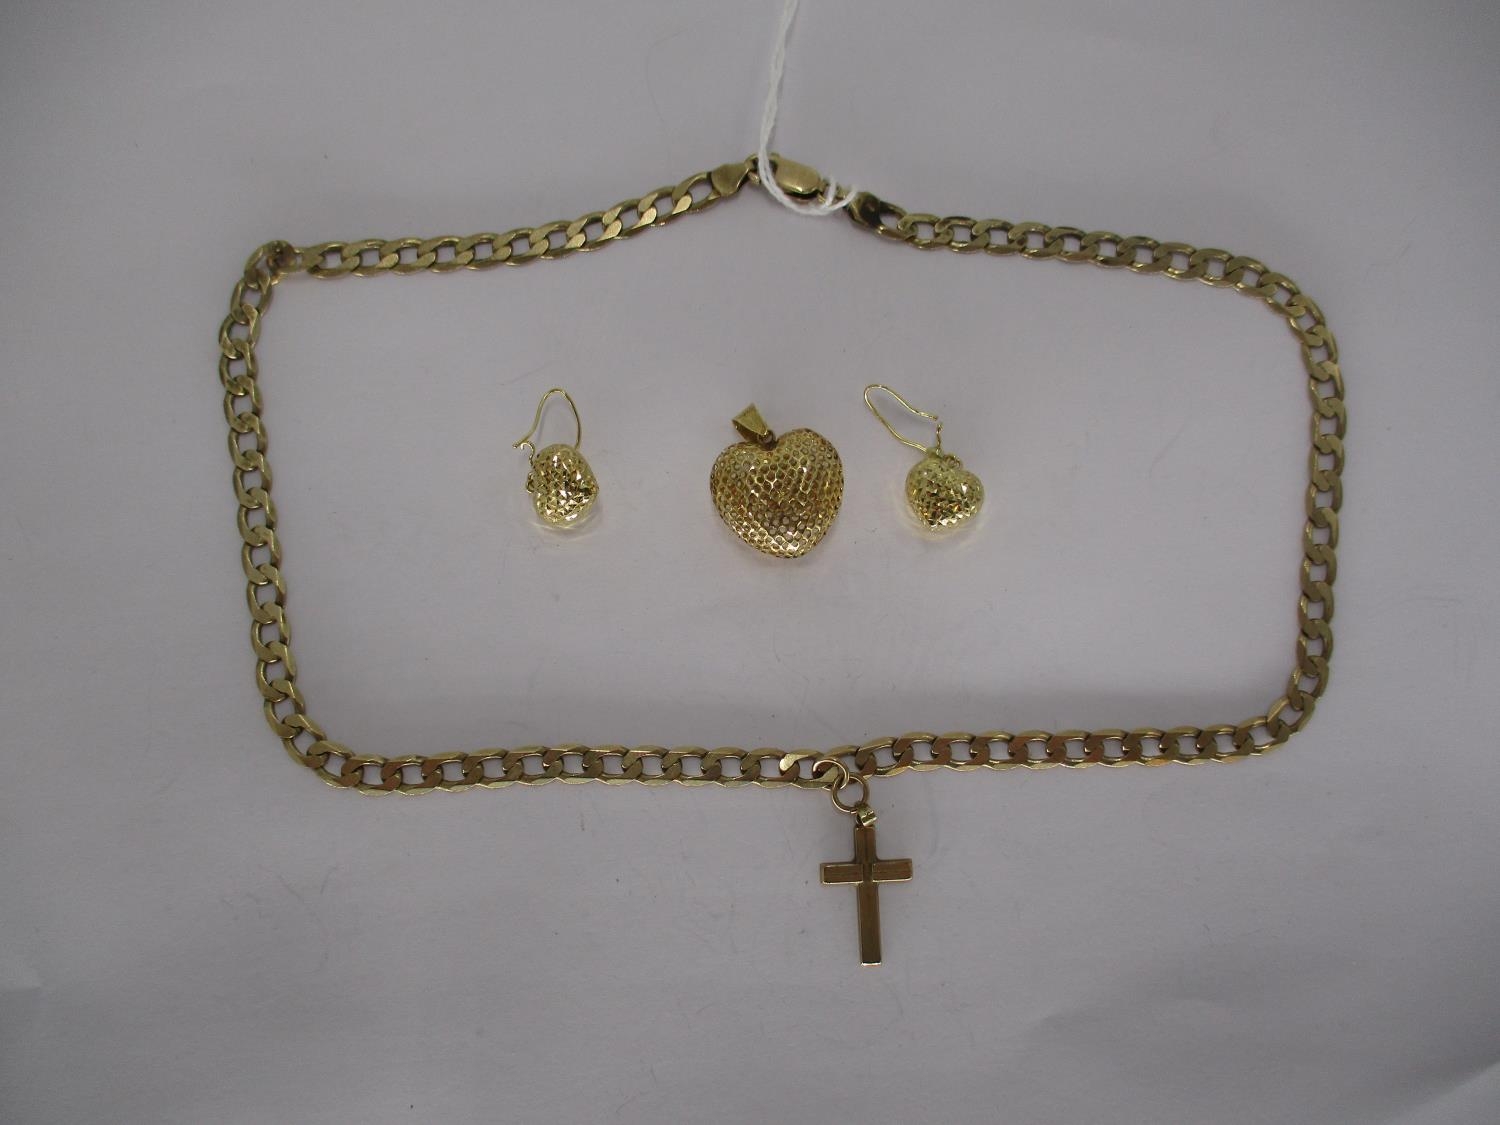 9ct Gold Necklace with a Cross Pendant, 9ct Gold Heart Pendant with Pair of Earrings, 19.34g total